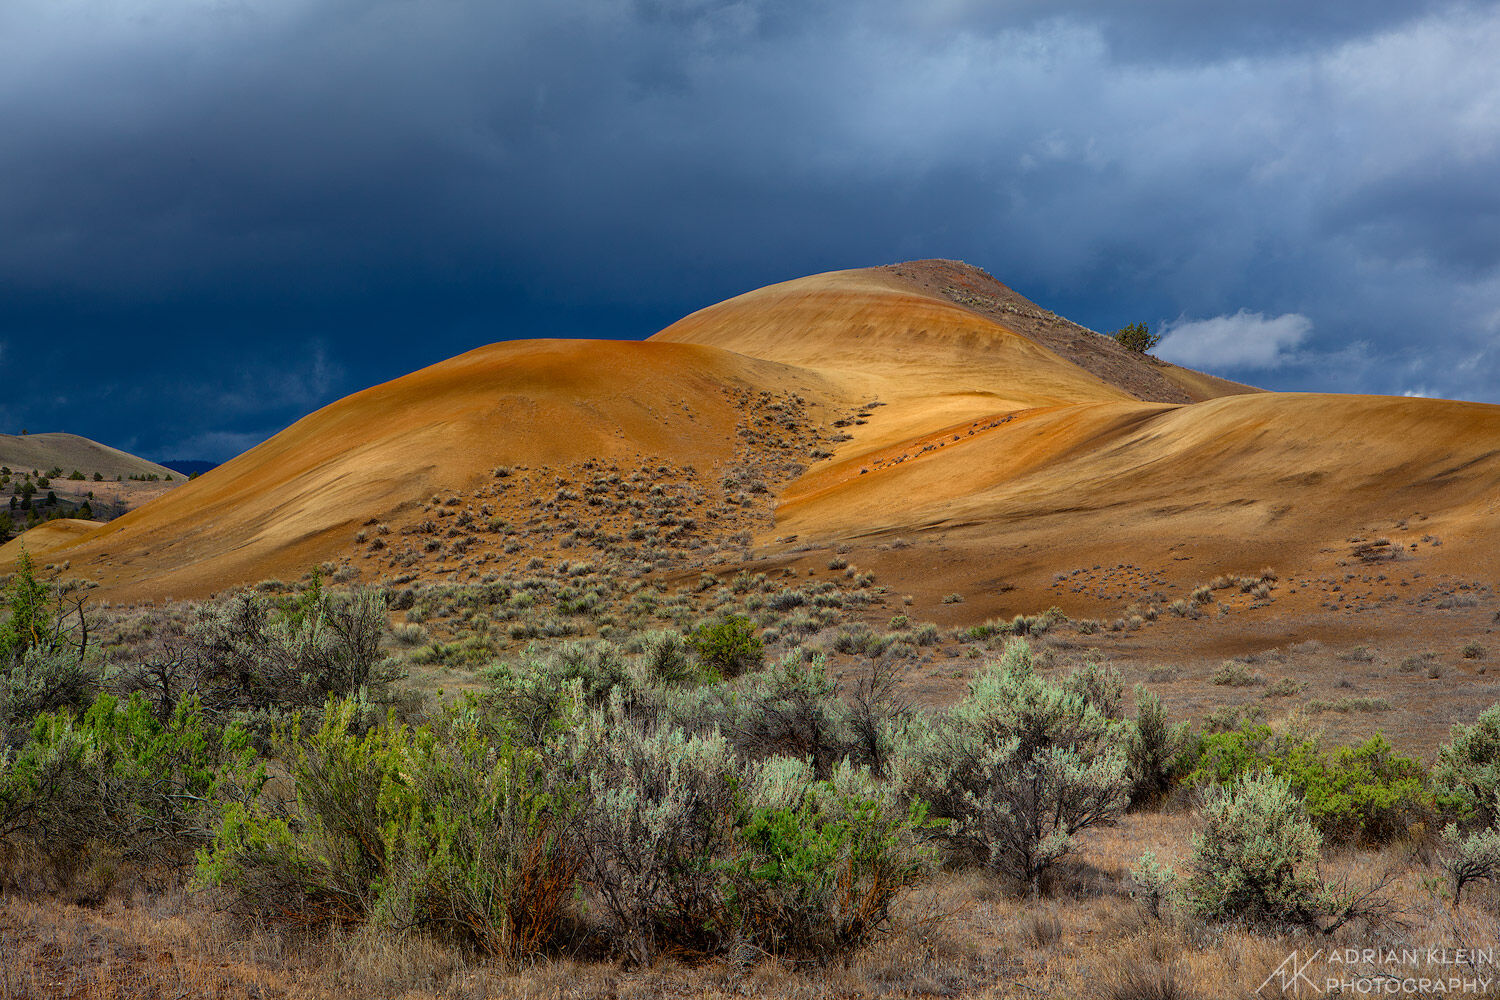 Hills in the area of Painted Hills Unit in central Oregon is lit up shortly after a passing storm. Limited Edition of 50.